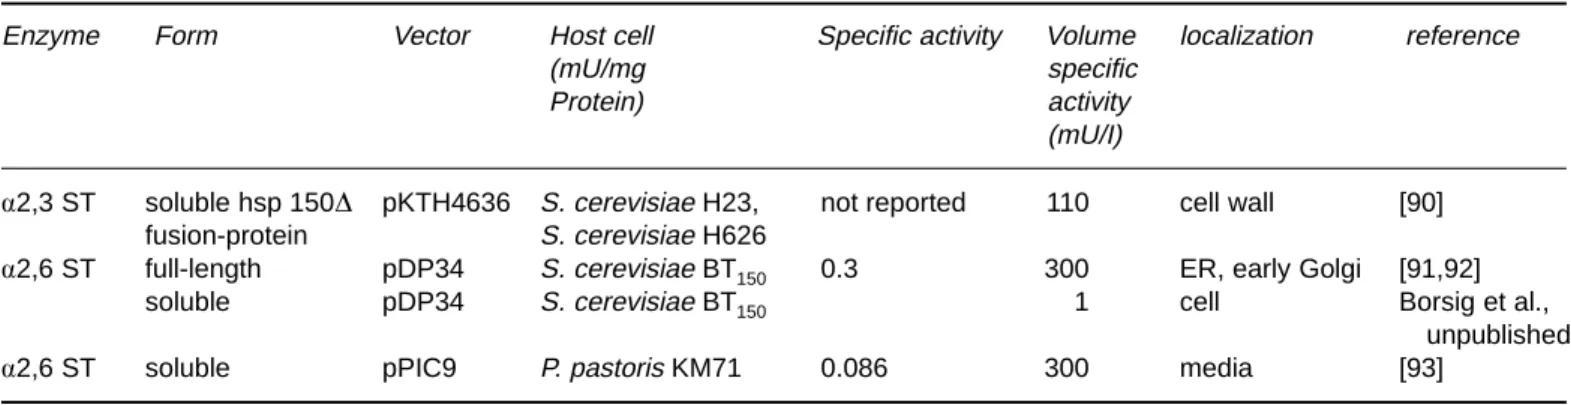 Table 4. Expression of sialyltransferases in yeast